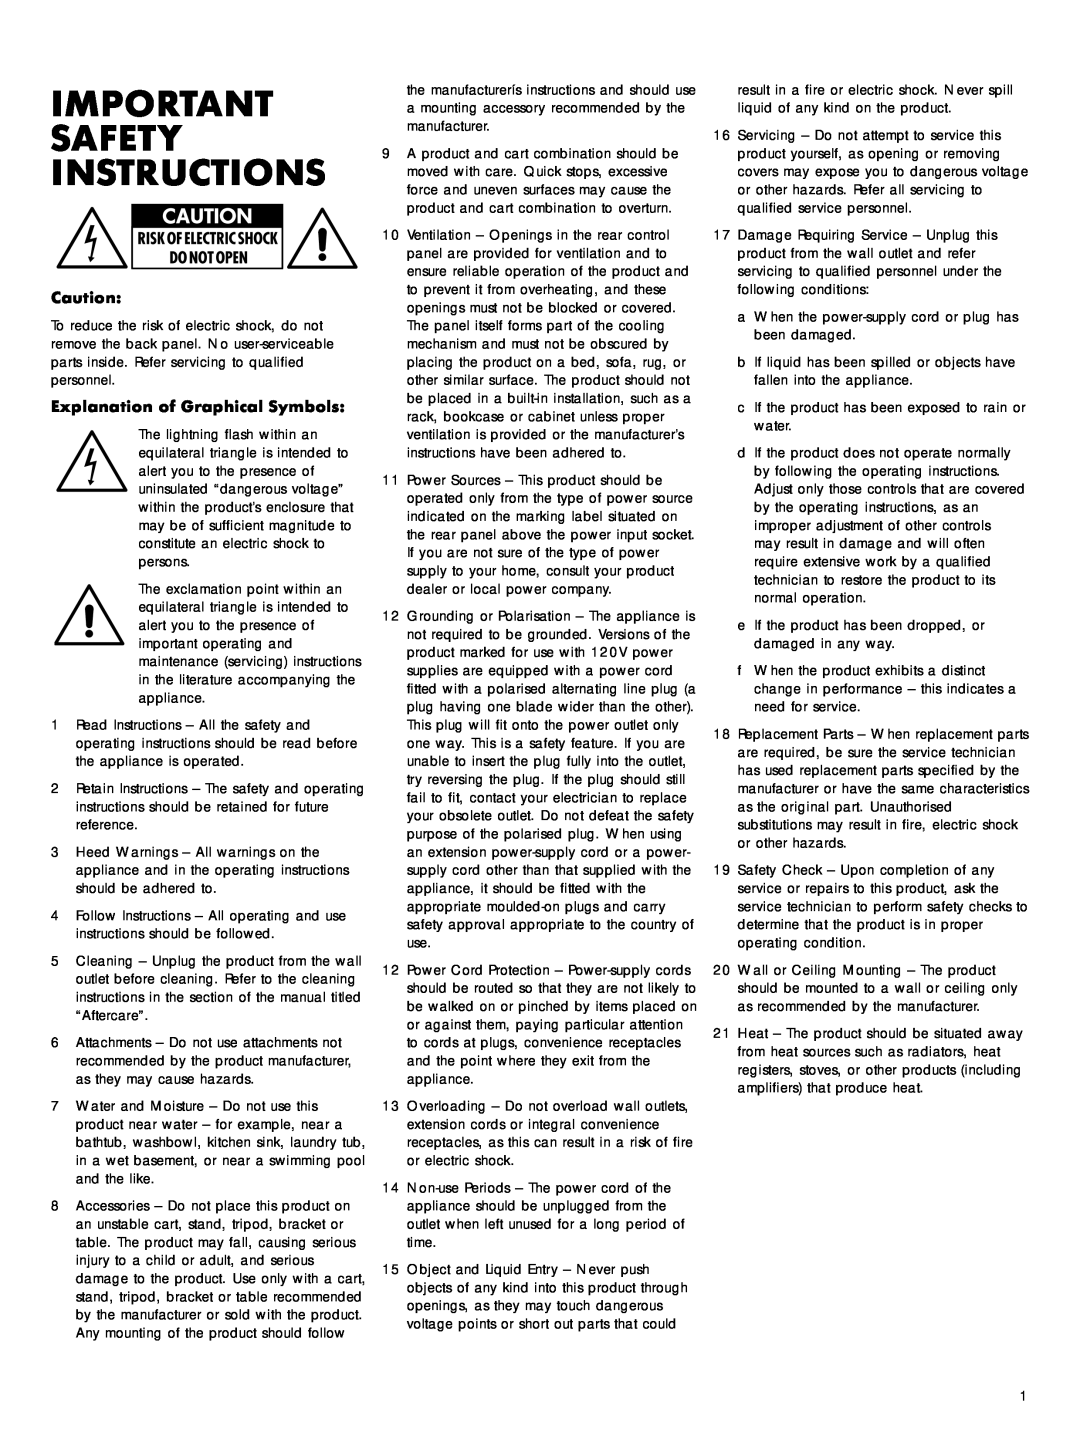 Bowers & Wilkins ASW 2500 owner manual Explanation of Graphical Symbols, Important Safety Instructions 